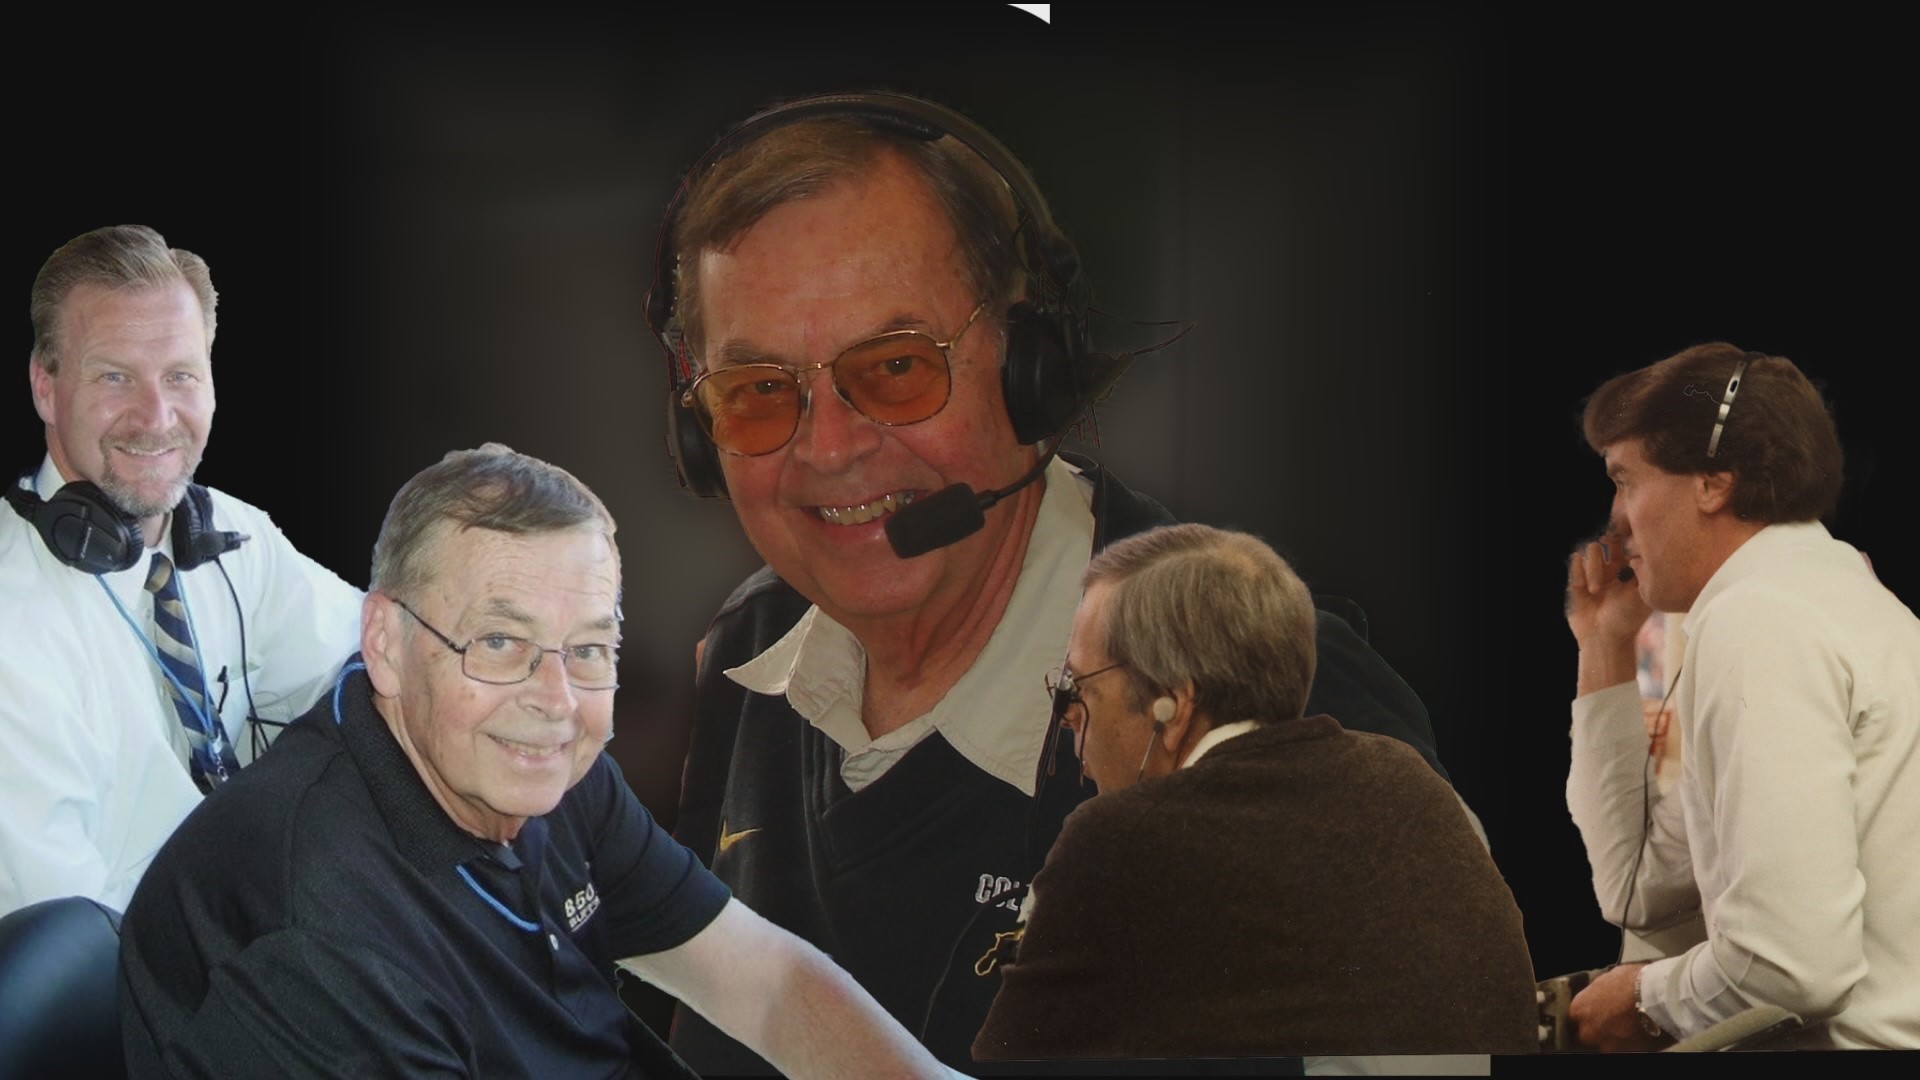 Current "Voice of the Buffs" Mark Johnson and Denver Broncos play-by-play broadcaster Dave Logan remember their friend Larry Zimmer.